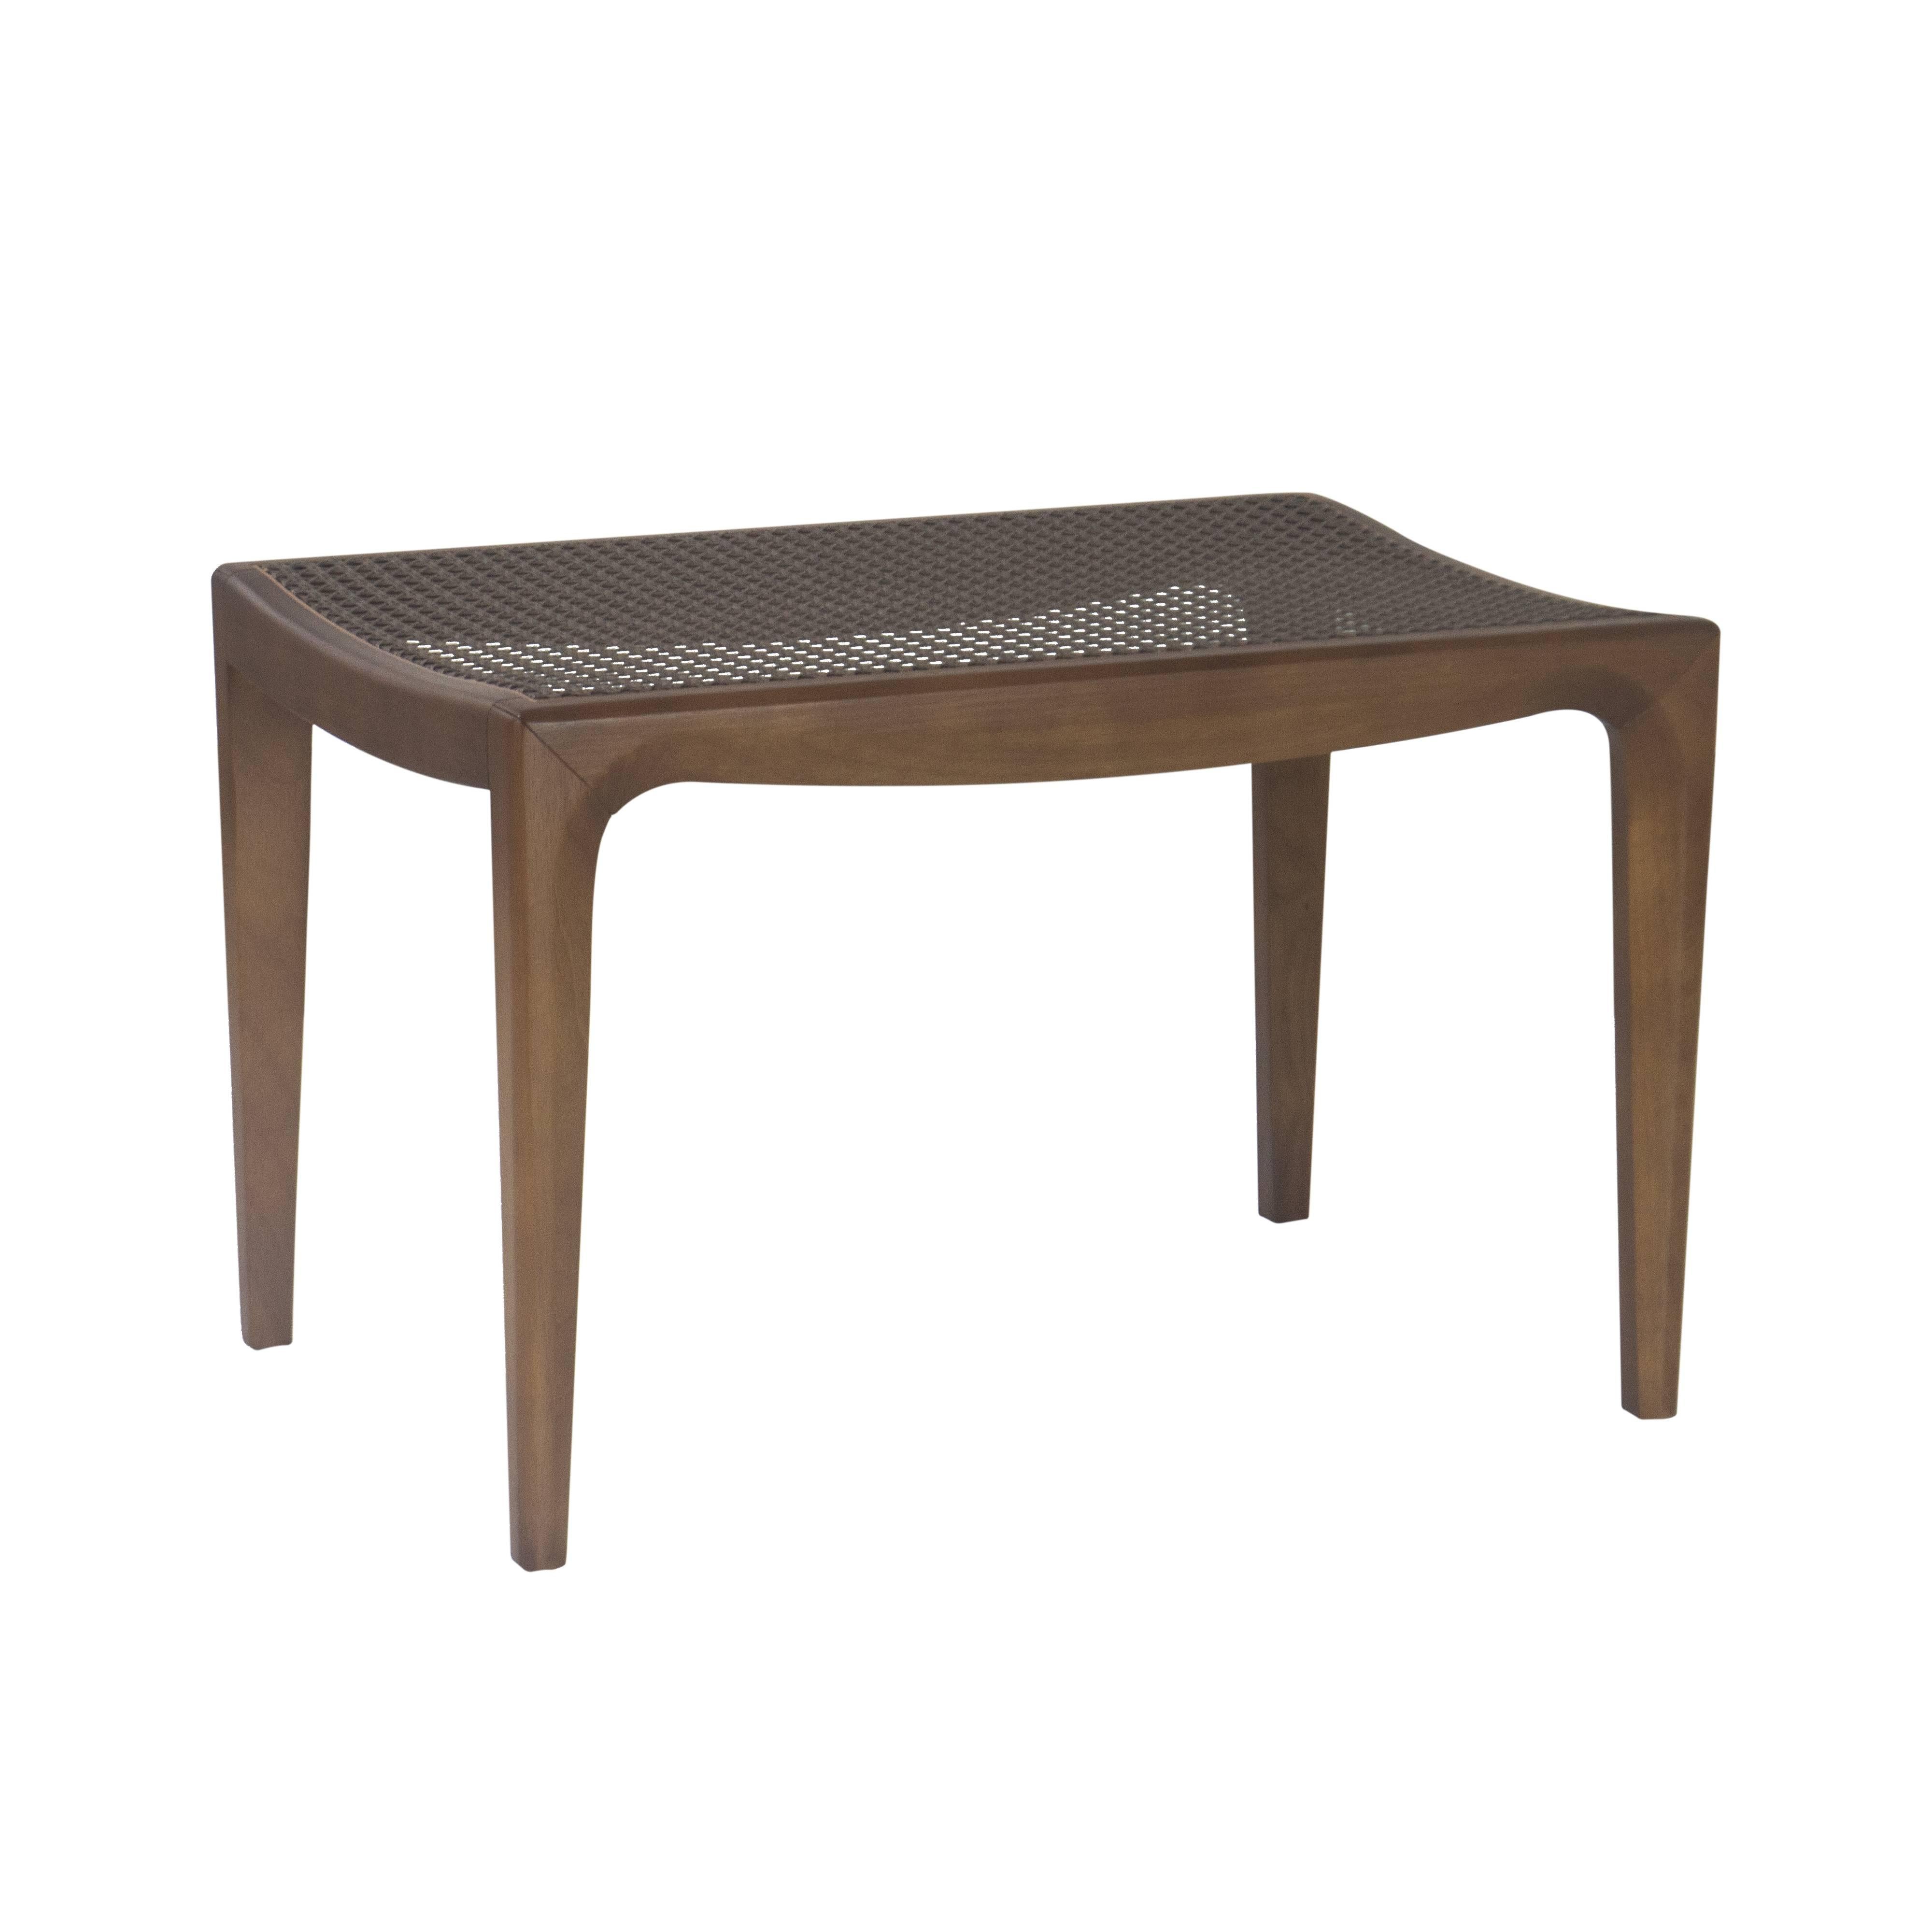 Our Padua Bench is a refined piece that is the perfect finishing touch to an entryway, bedroom, or any space where extra seating is needed. 

Item Details:
Wood: Ebanized
Straw: Ebanized

NOTE: THE IMAGES ARE ILLUSTRATIVE, THE FINISHES ARE IN THE